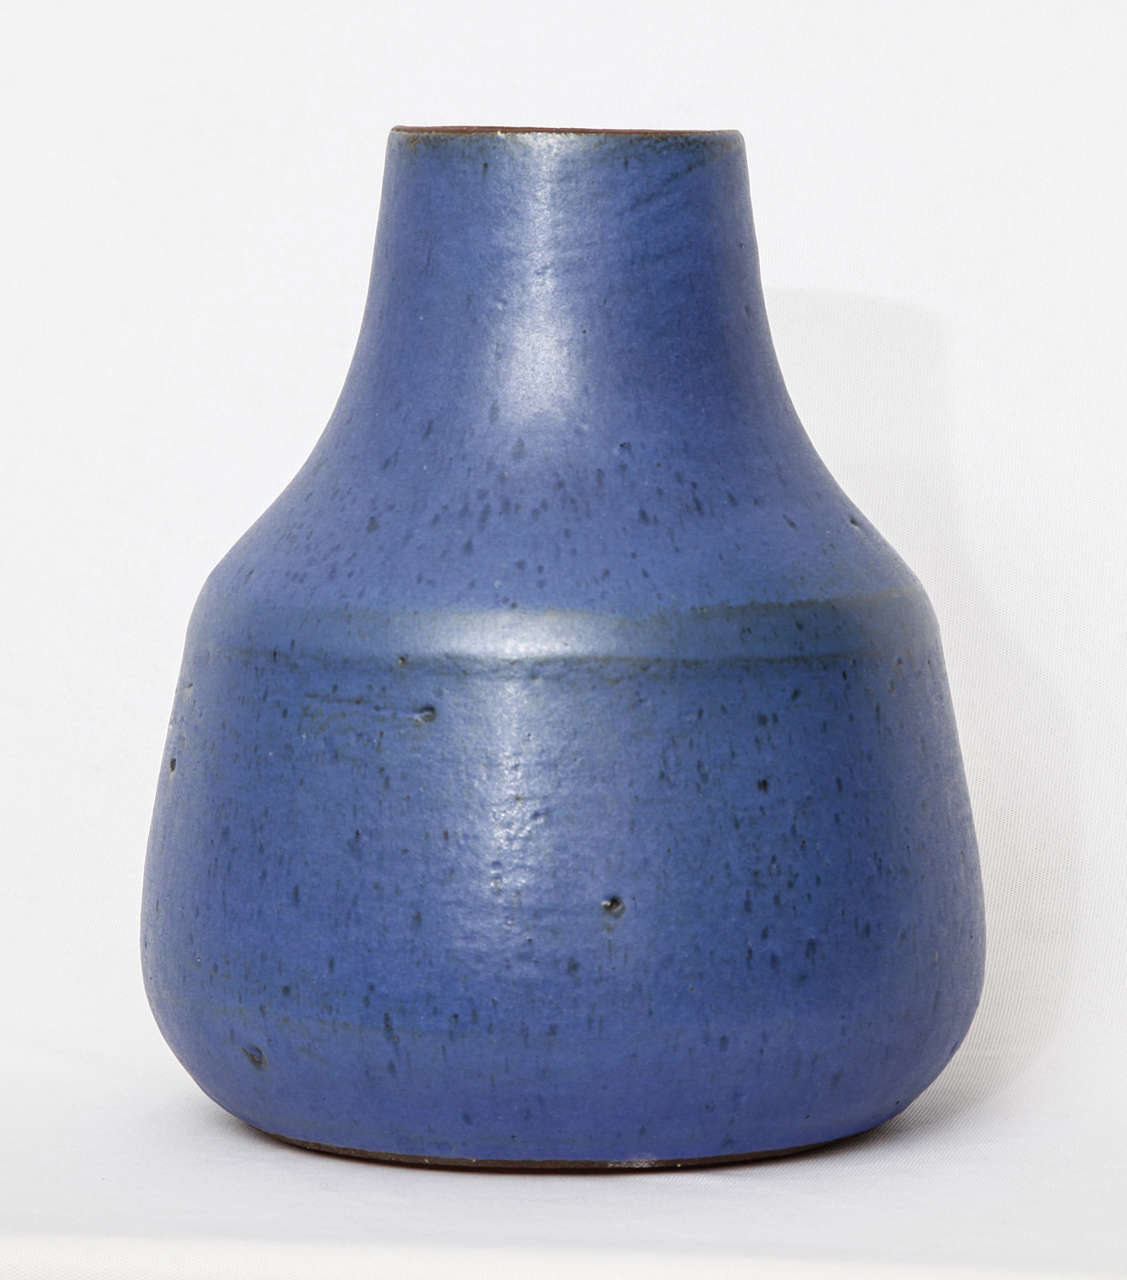 Round-shaped glazed ceramic vase designed by the Belgian artist Rogier Vandeweghe (1923) and executed by Amphora, his own ceramic workshop located in Brugges (B). 
Stamped signature on the base (see last image).